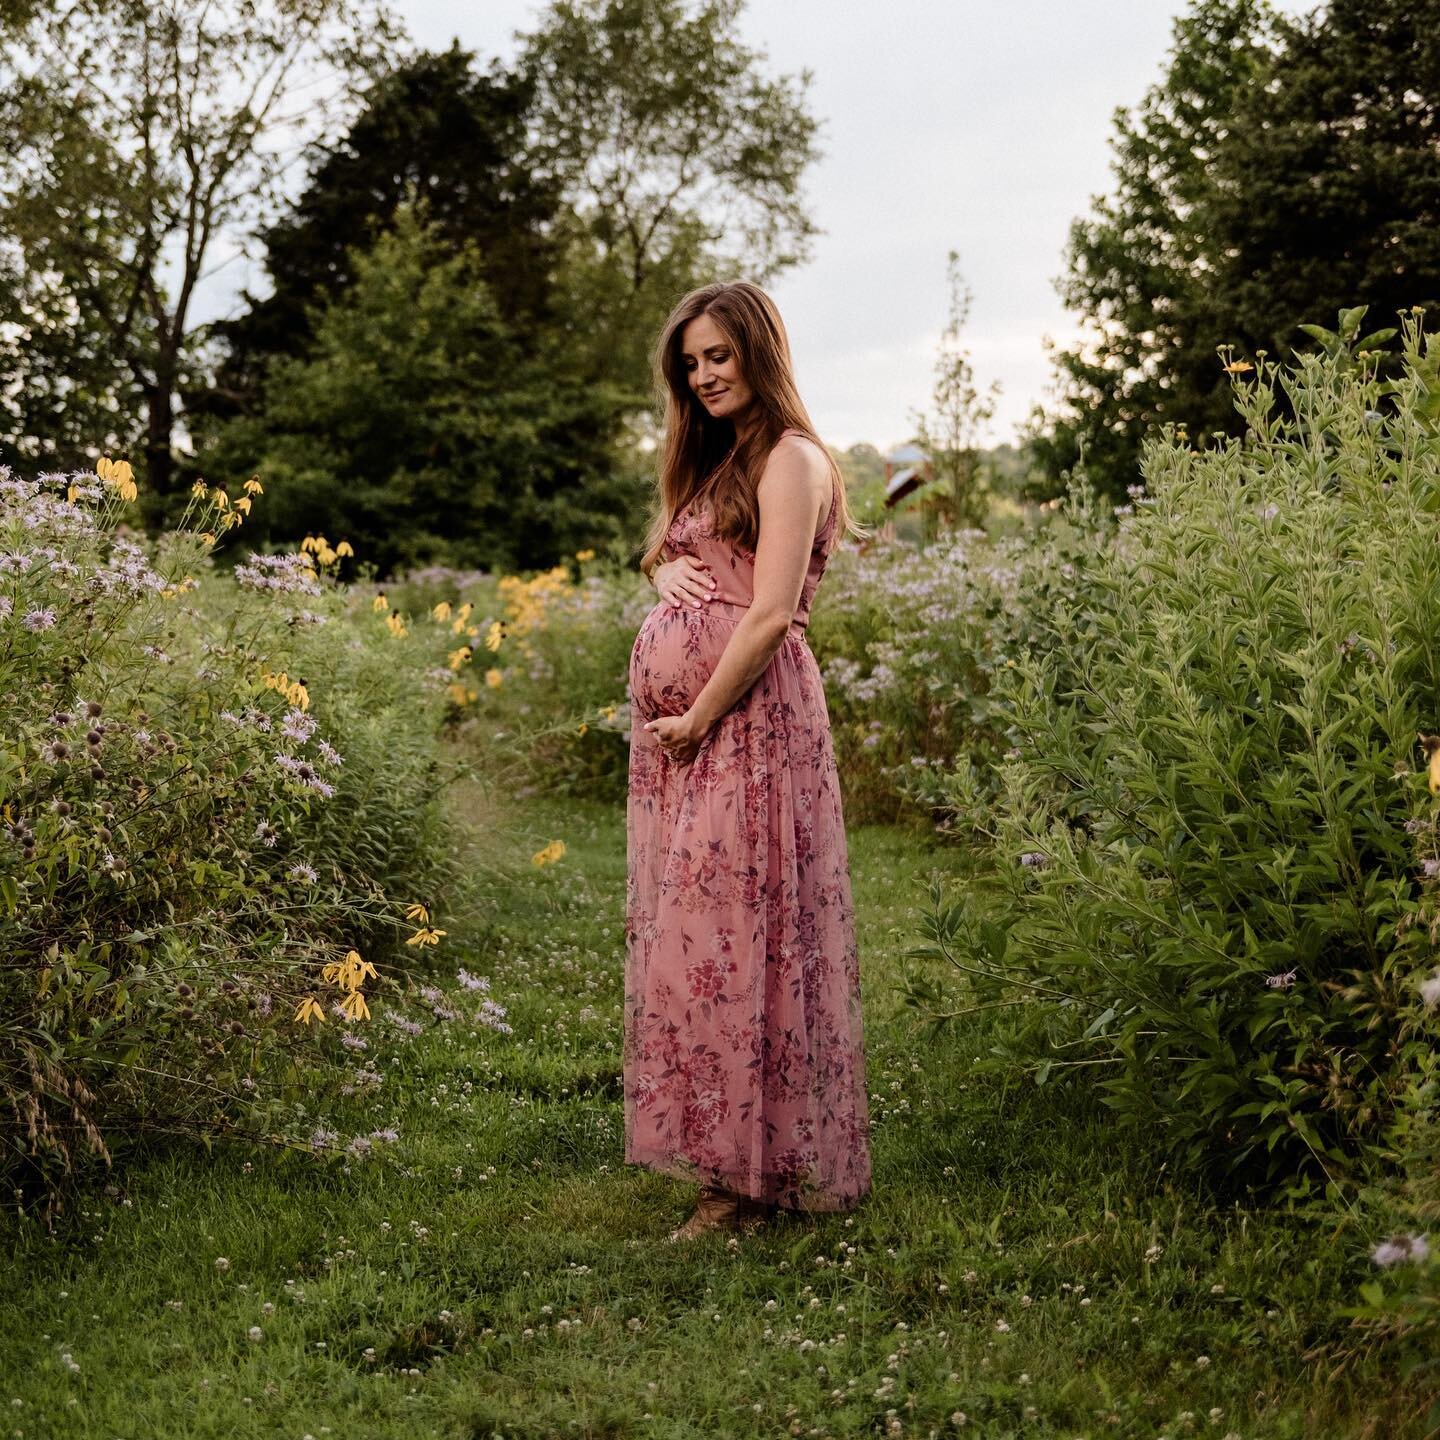 Spent some time in the wildflowers with Roseann, Jason, and baby-to-be Louise. Can&rsquo;t ask for any better weather and company for a mid-July shoot!